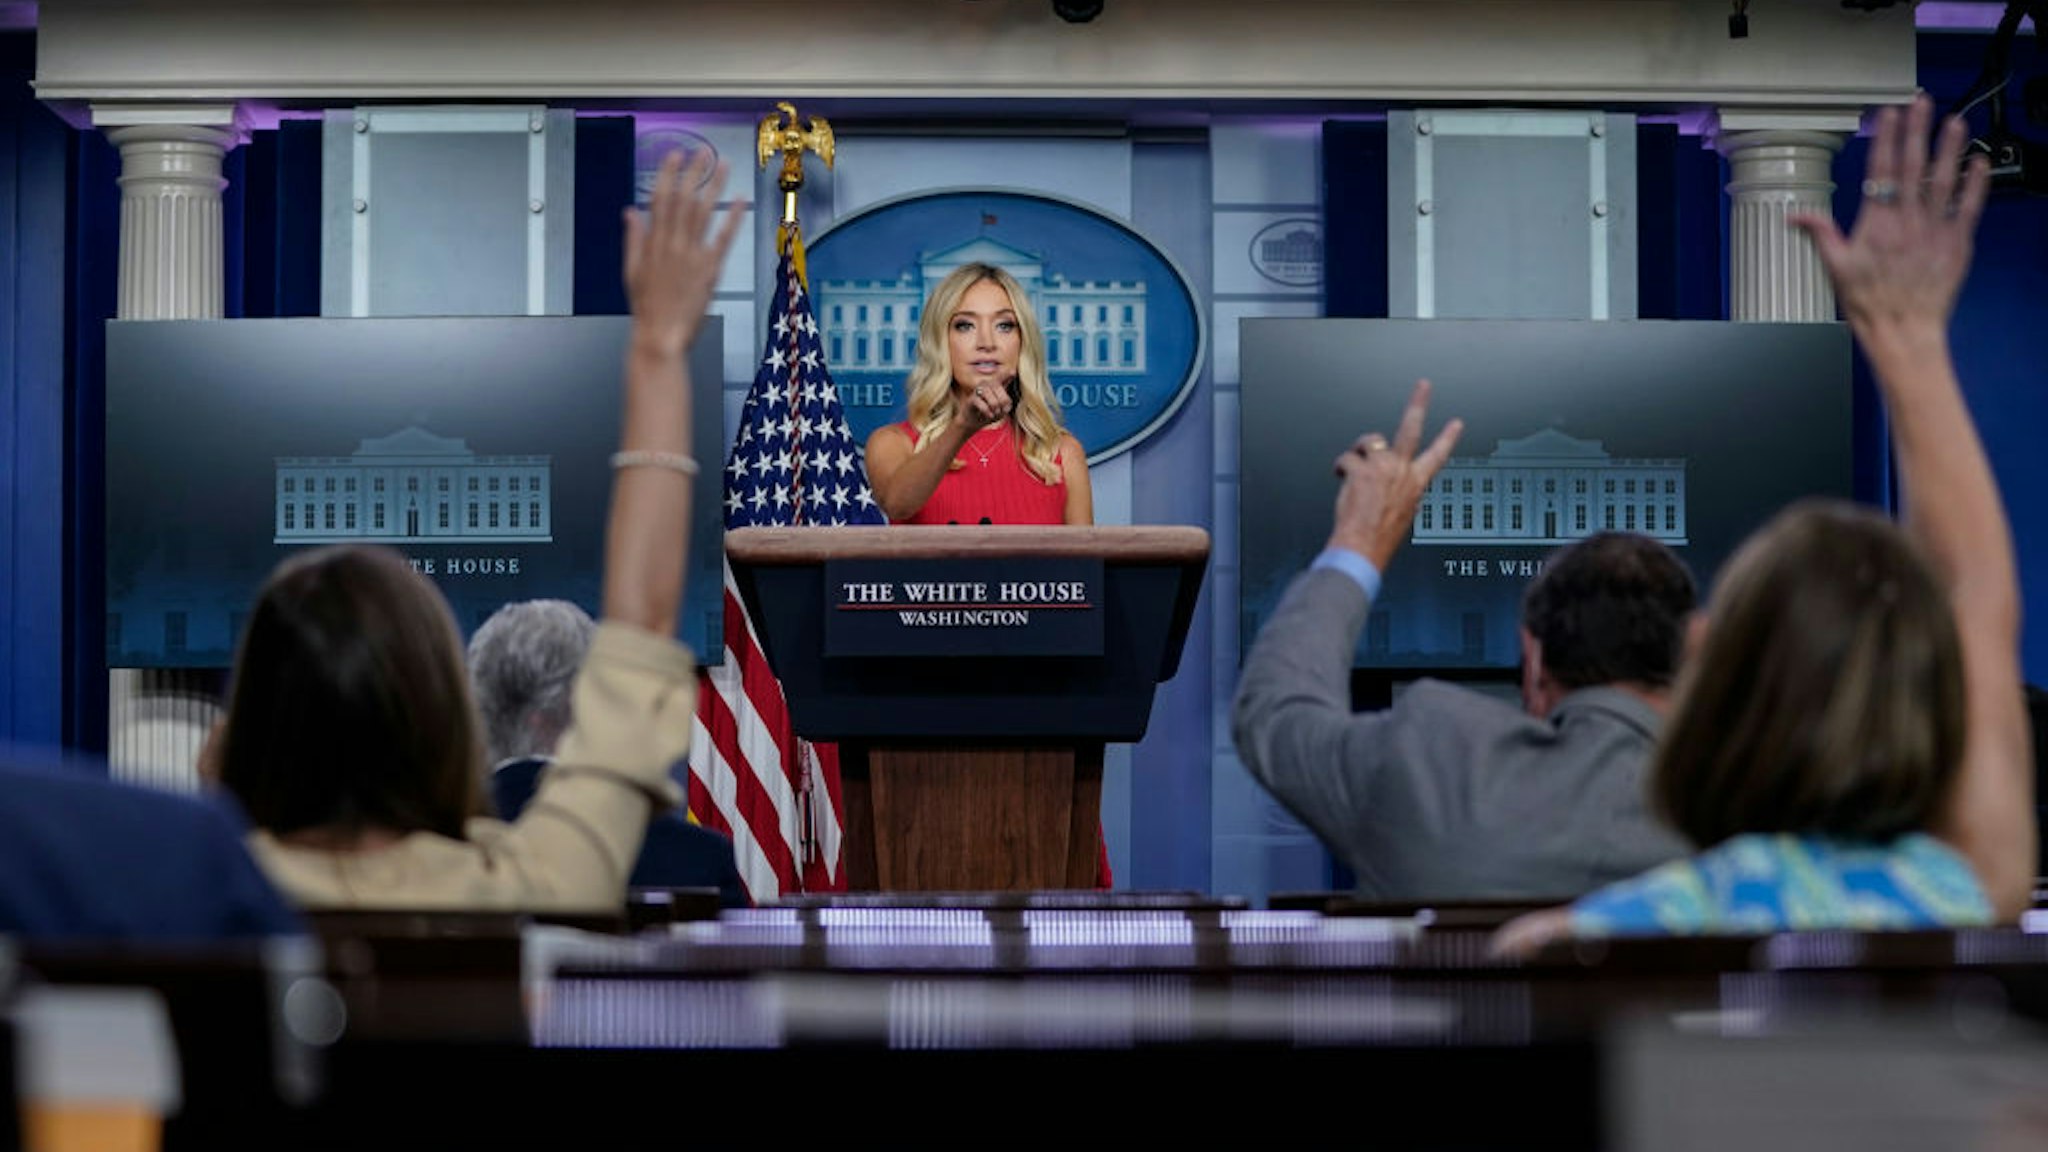 White House Press Secretary Kayleigh McEnany speaks during a press briefing at the White House on June 10, 2020 in Washington, DC. McEnany stated that President Trump does not support any name changes for U.S. military bases named after Confederate generals. (Photo by Drew Angerer/Getty Images)